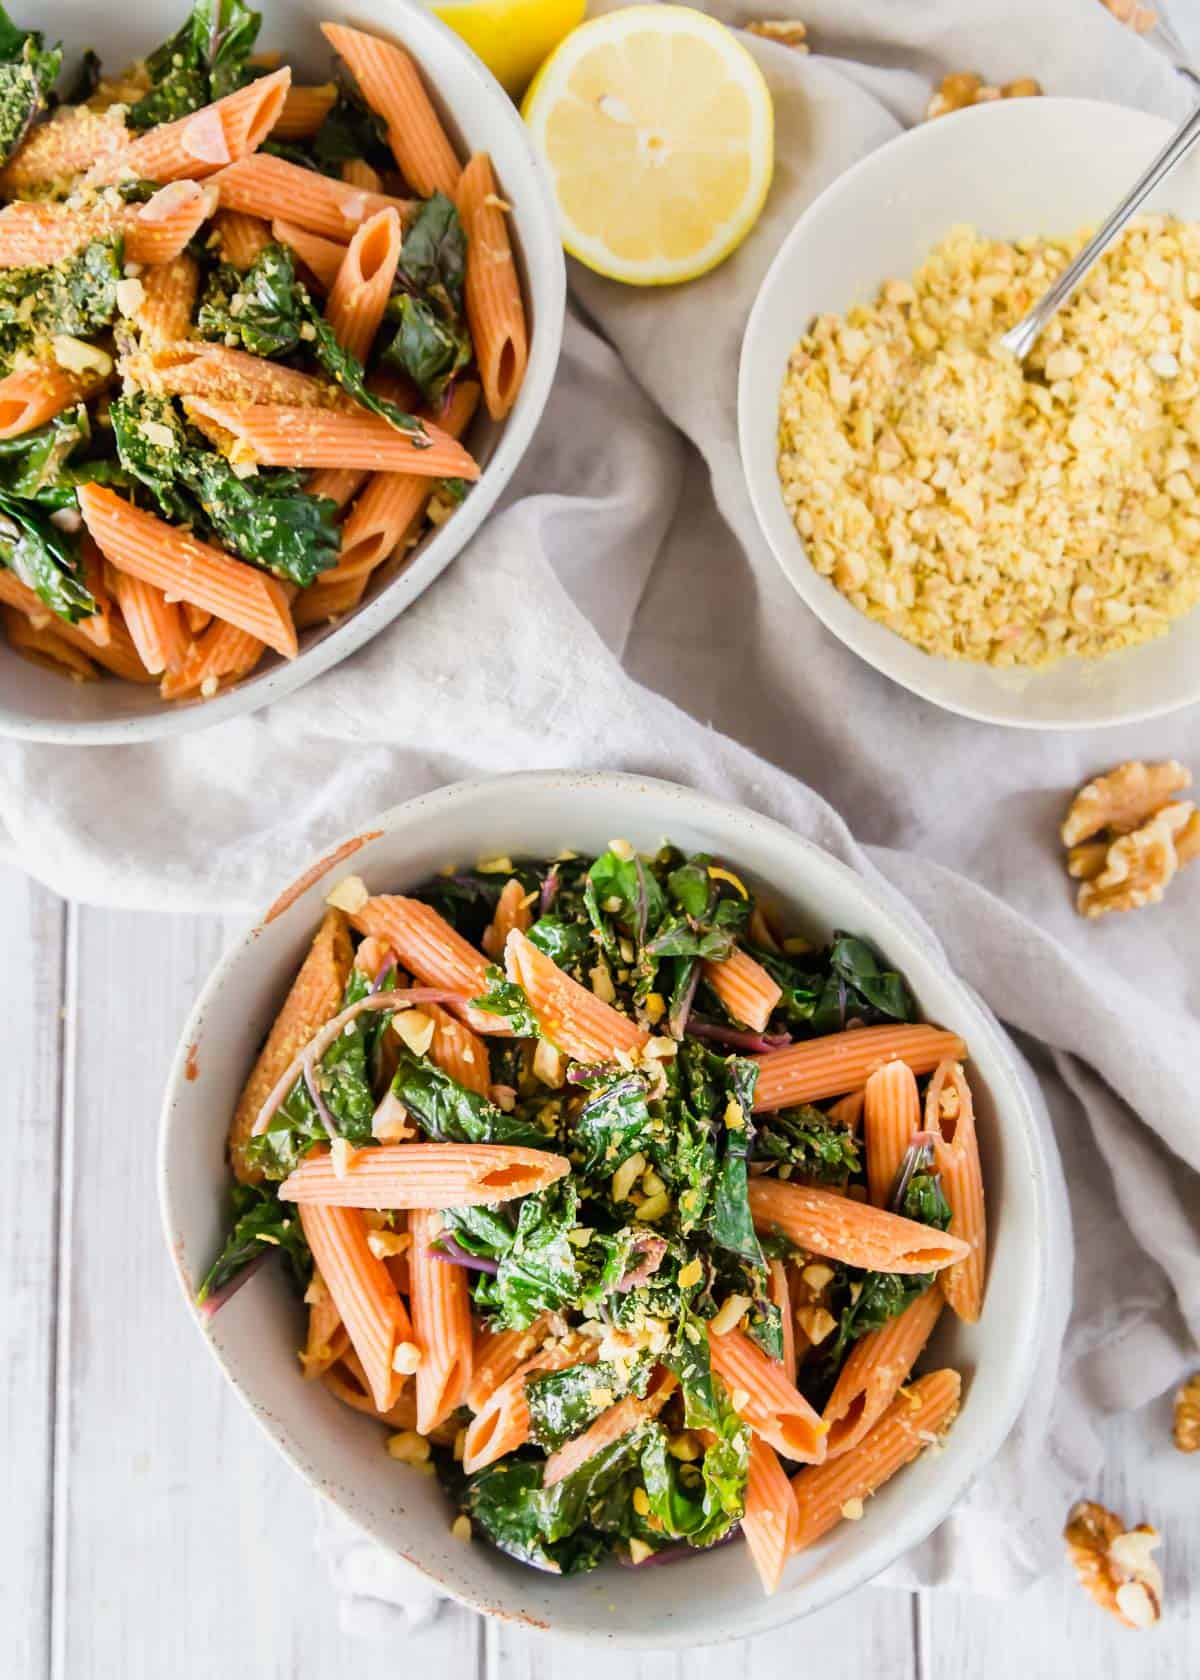 This easy red lentil pasta recipe includes sautéed garlicky lemon kale and a vegan walnut "cheese" topping.